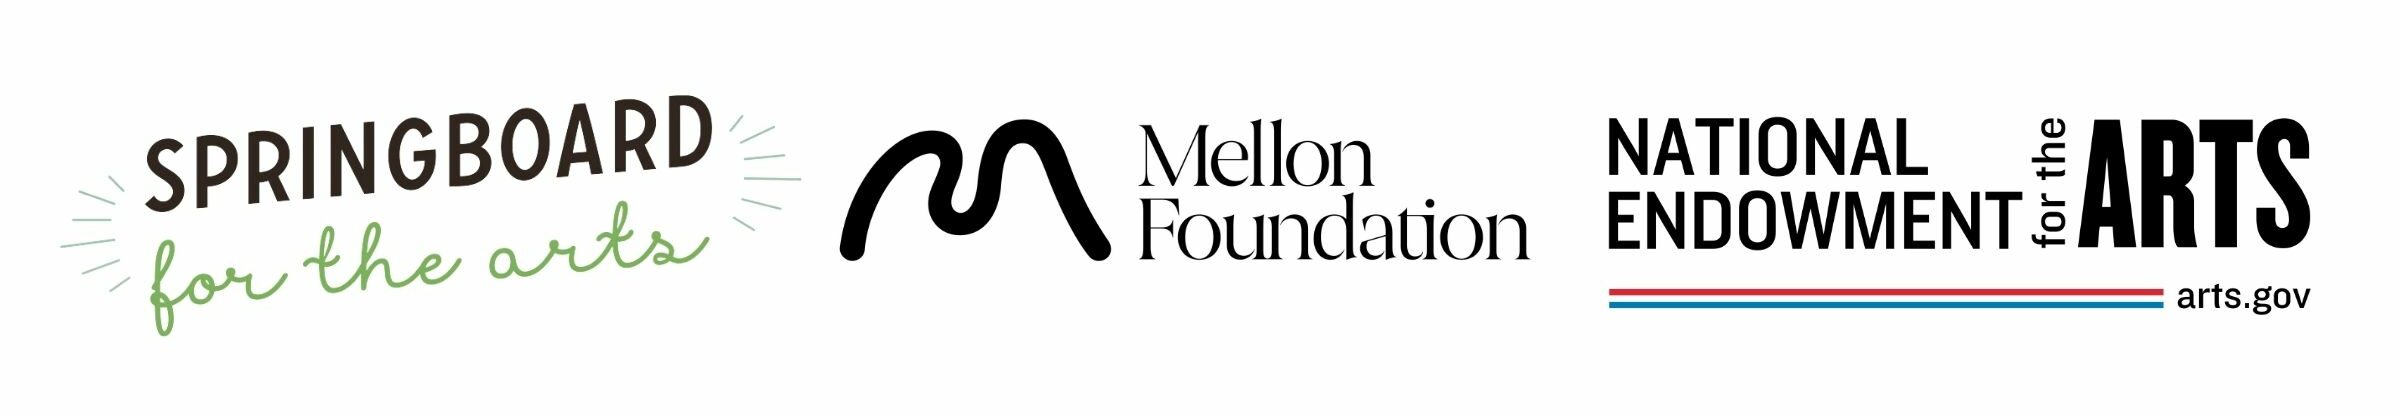 Creative Change Coalition partner logos, Springboard for the Arts, the Mellon Foundation, and the National Endowment for the Arts